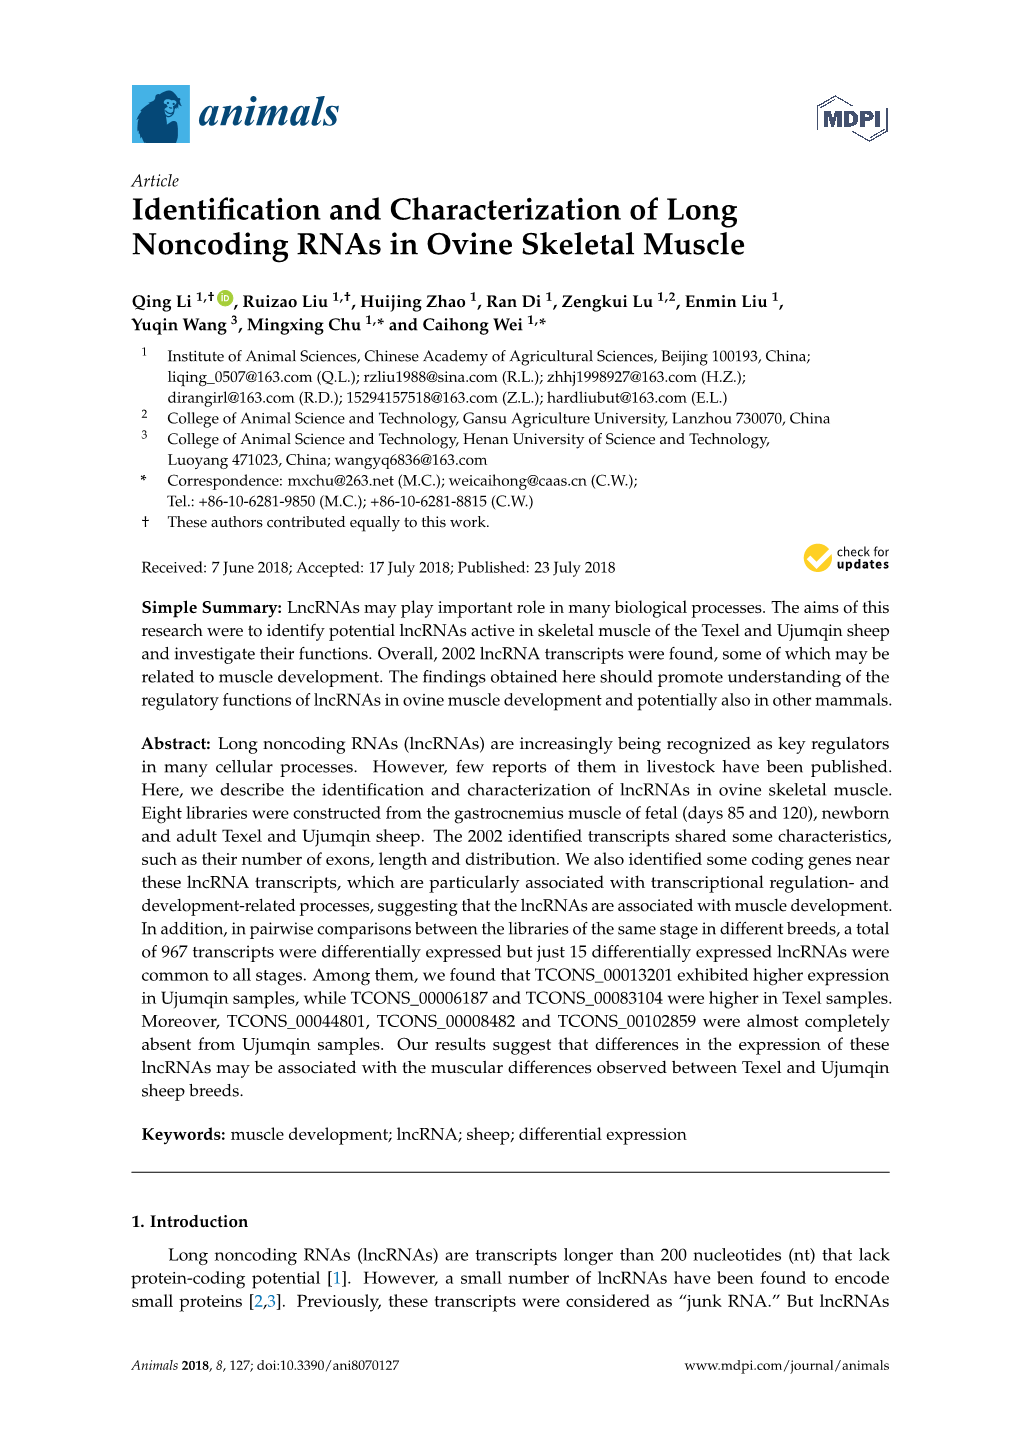 Identification and Characterization of Long Noncoding Rnas in Ovine